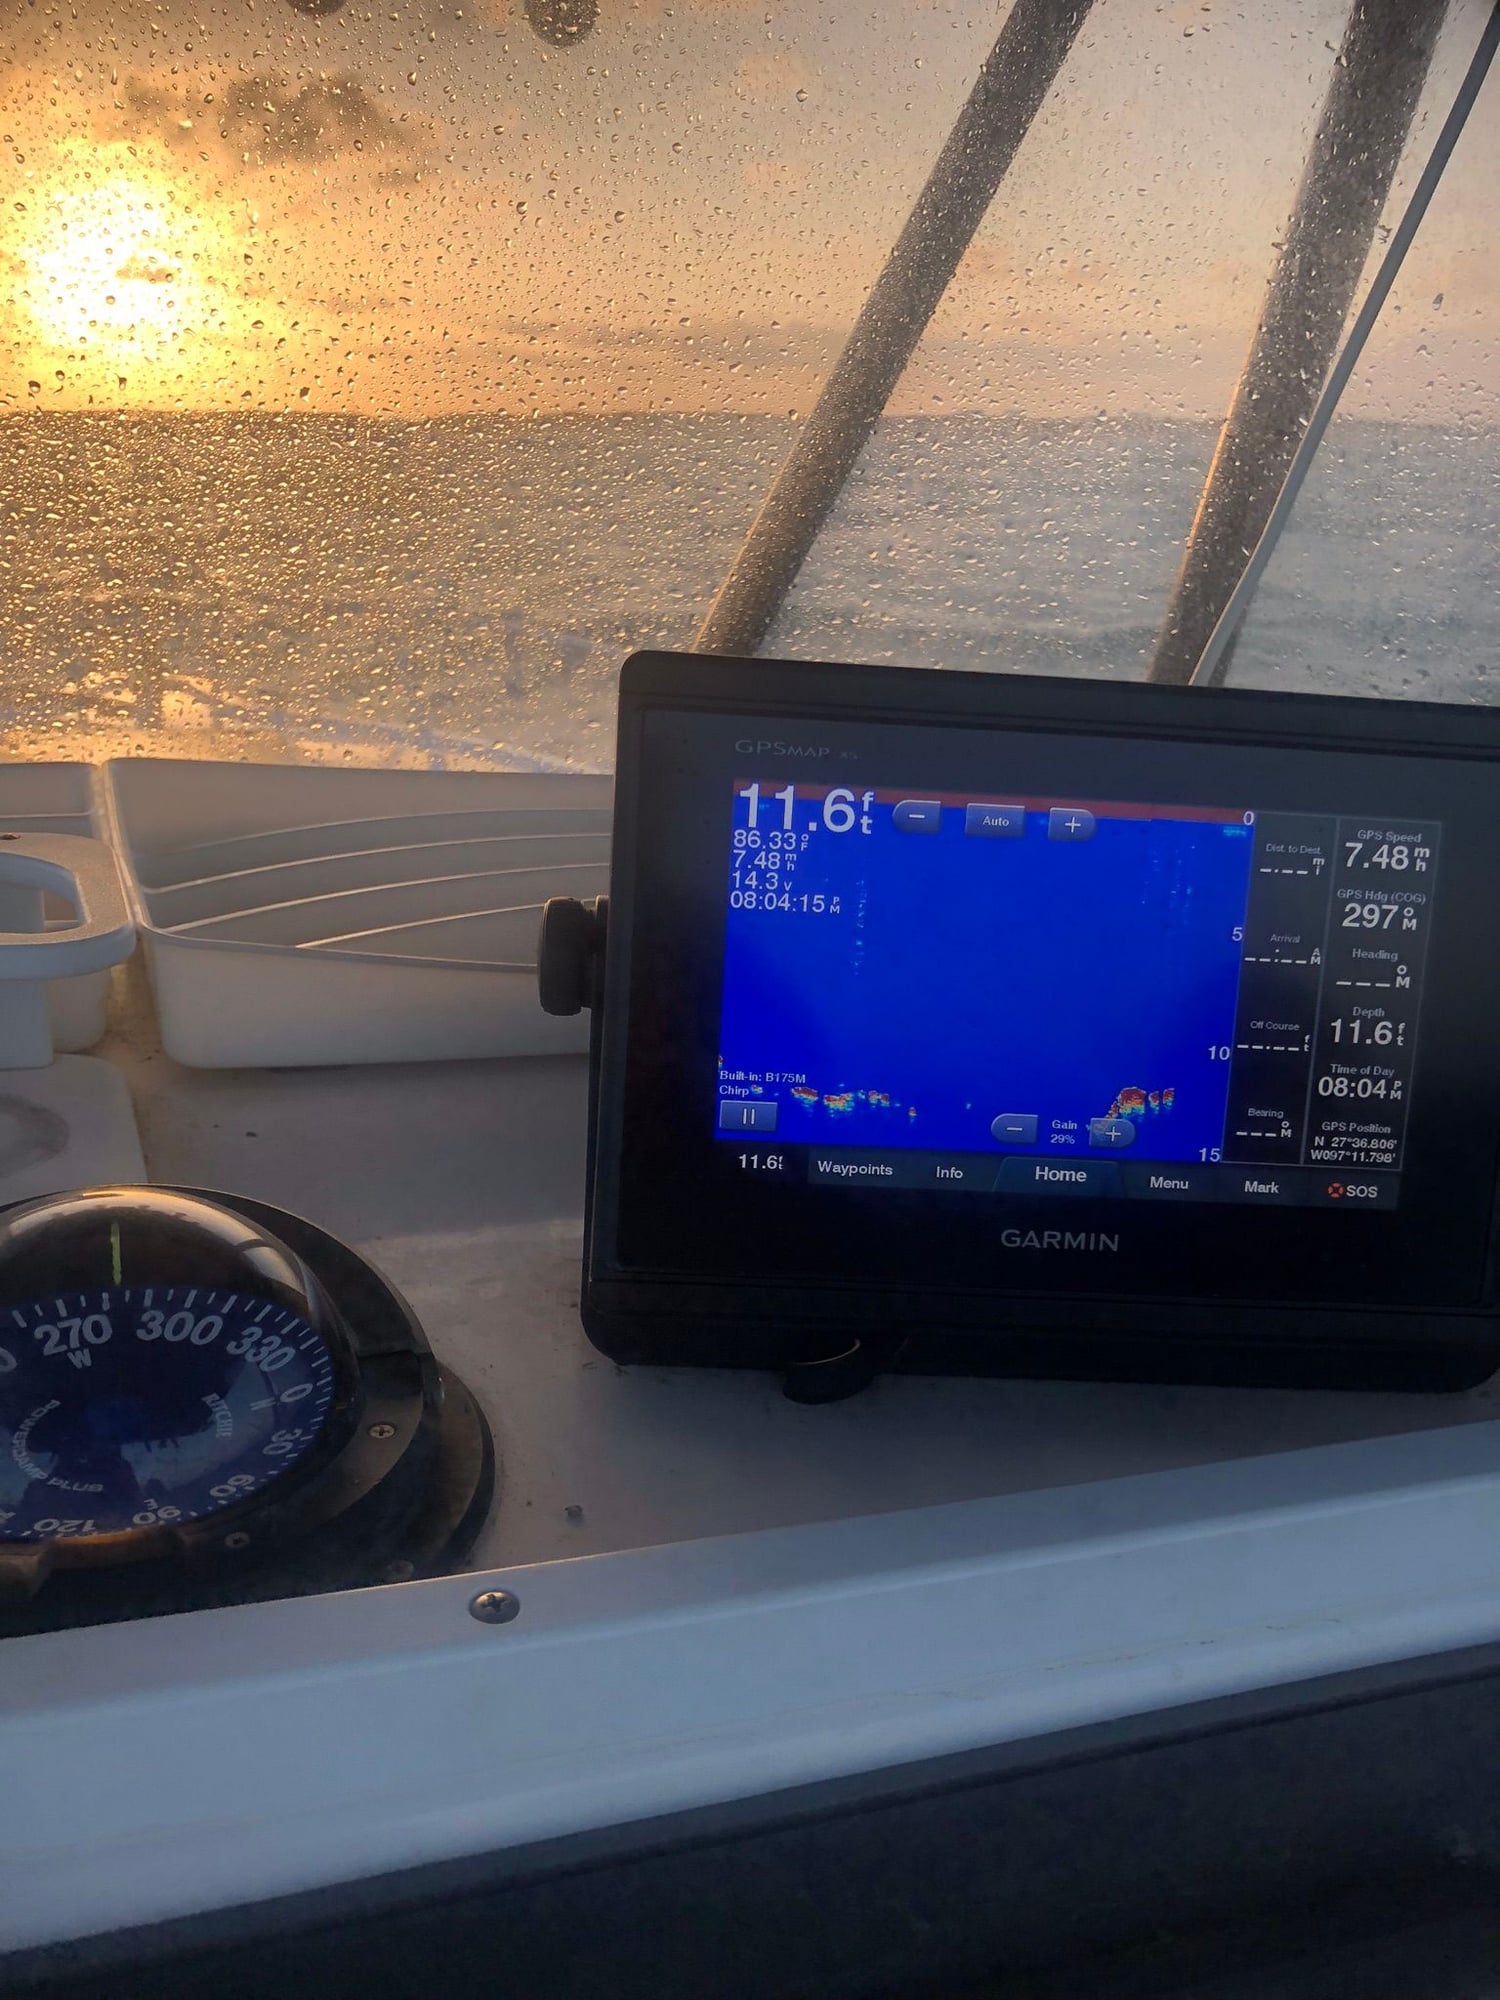 Is my transducer bad? - The Hull Truth - Boating and Fishing Forum